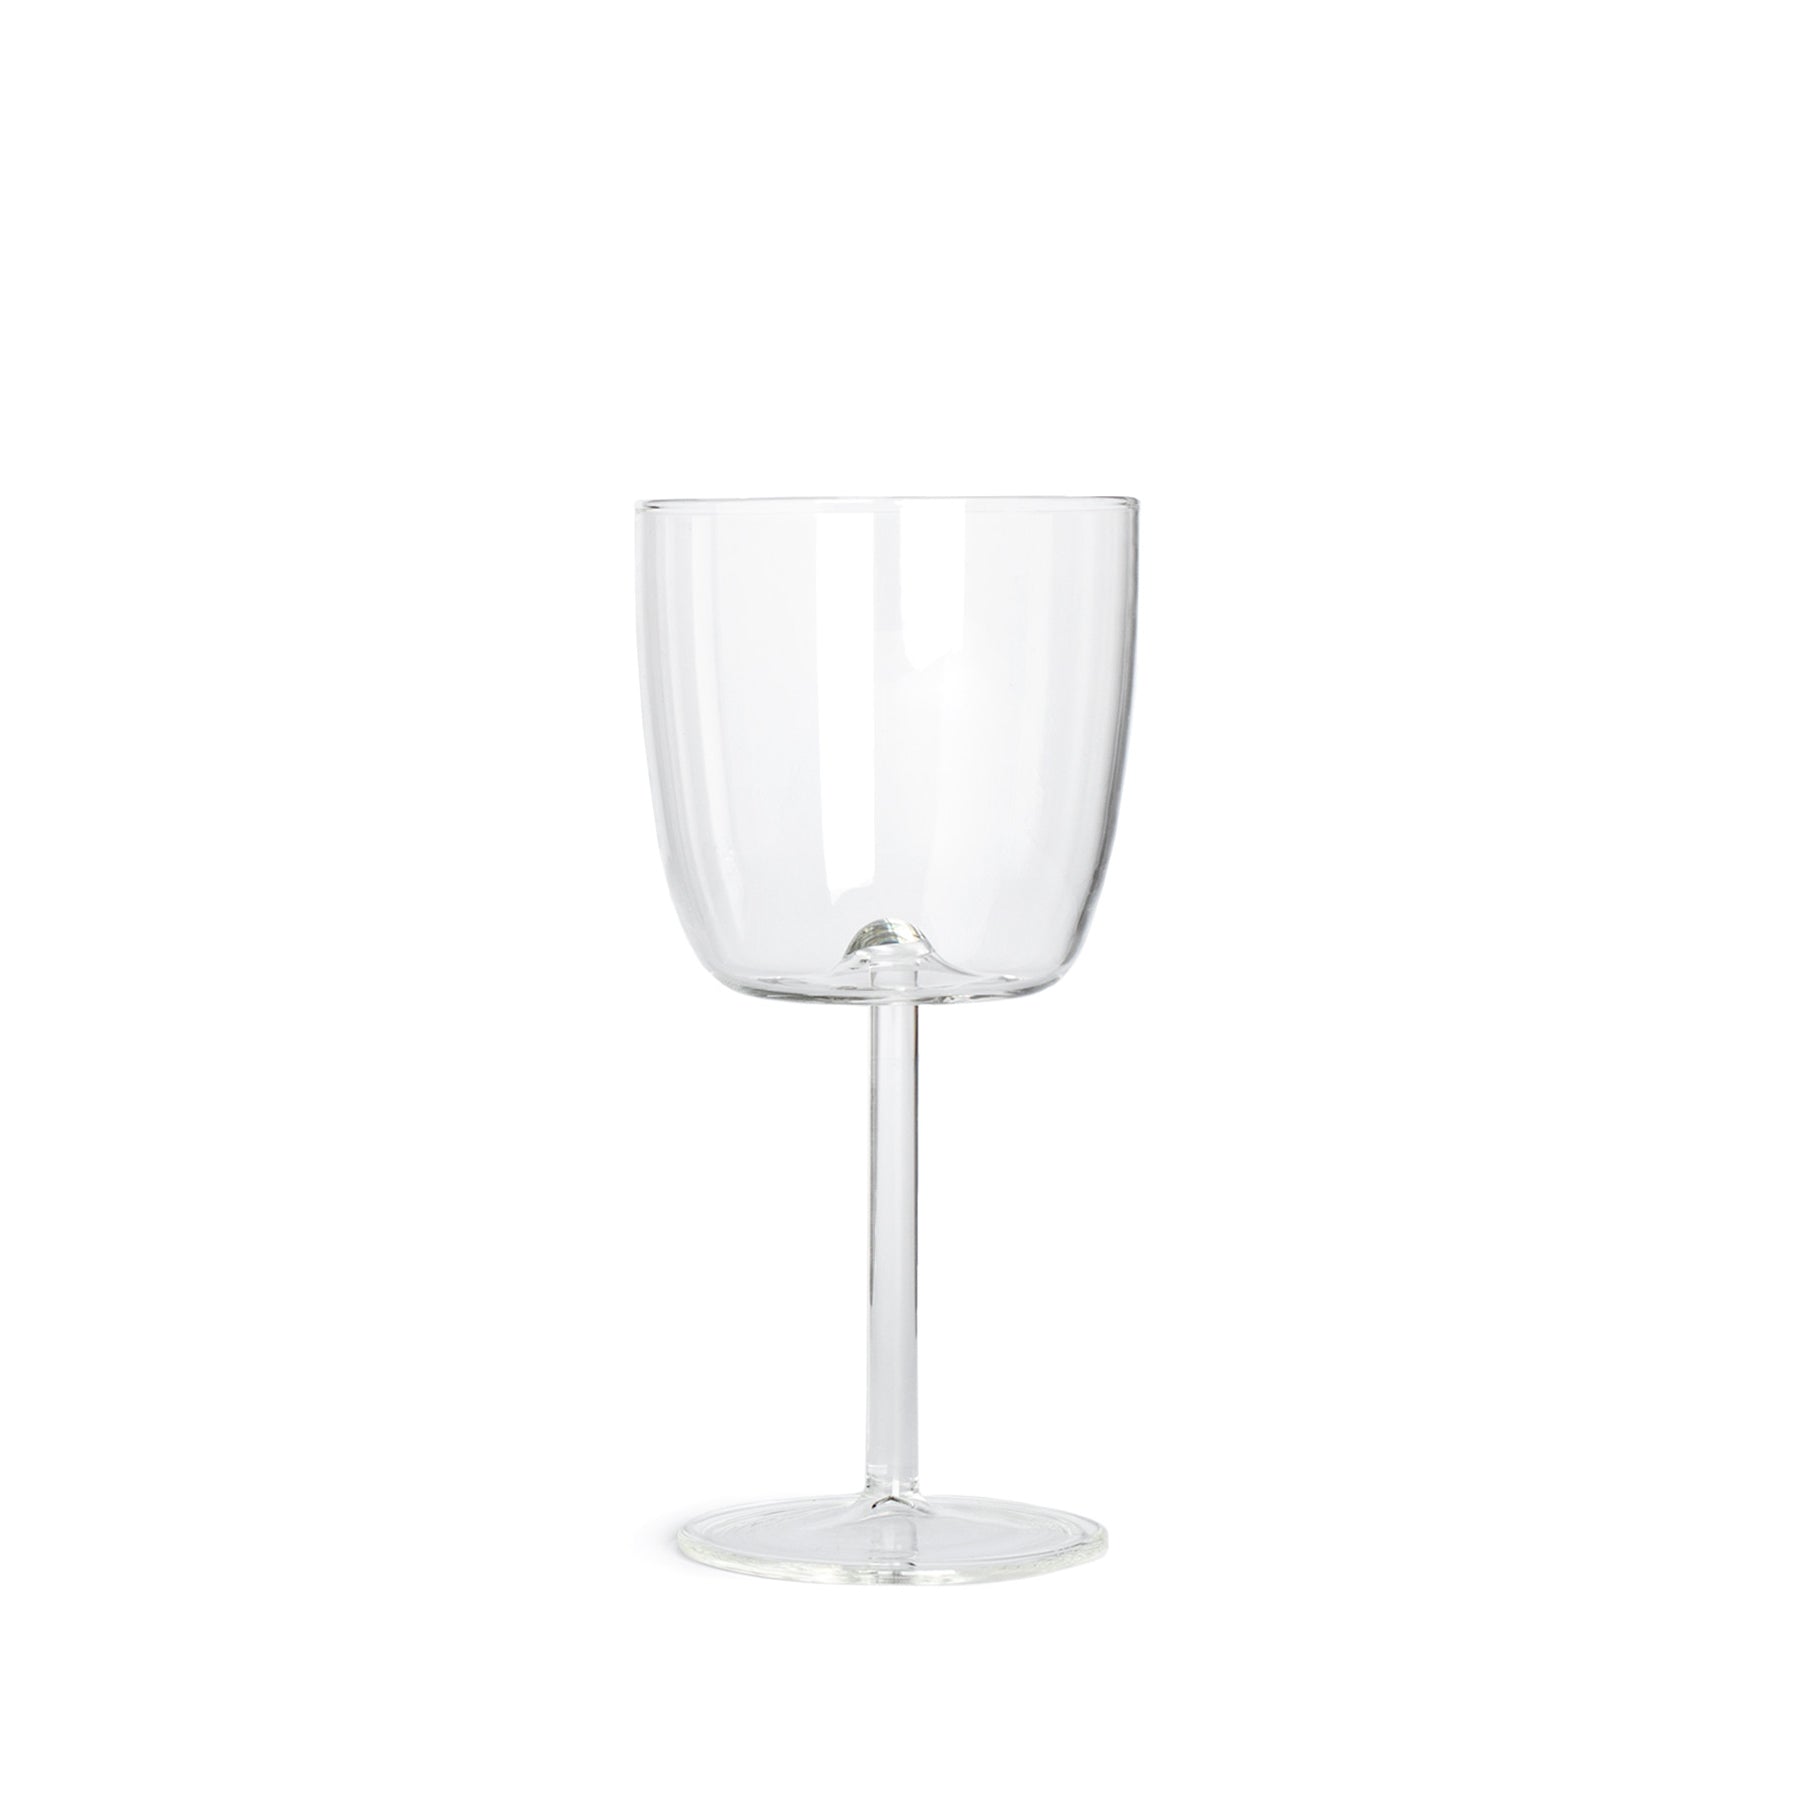 Tuccio Calice Stem Glass in Clear (Set of 2) Zoom Image 1